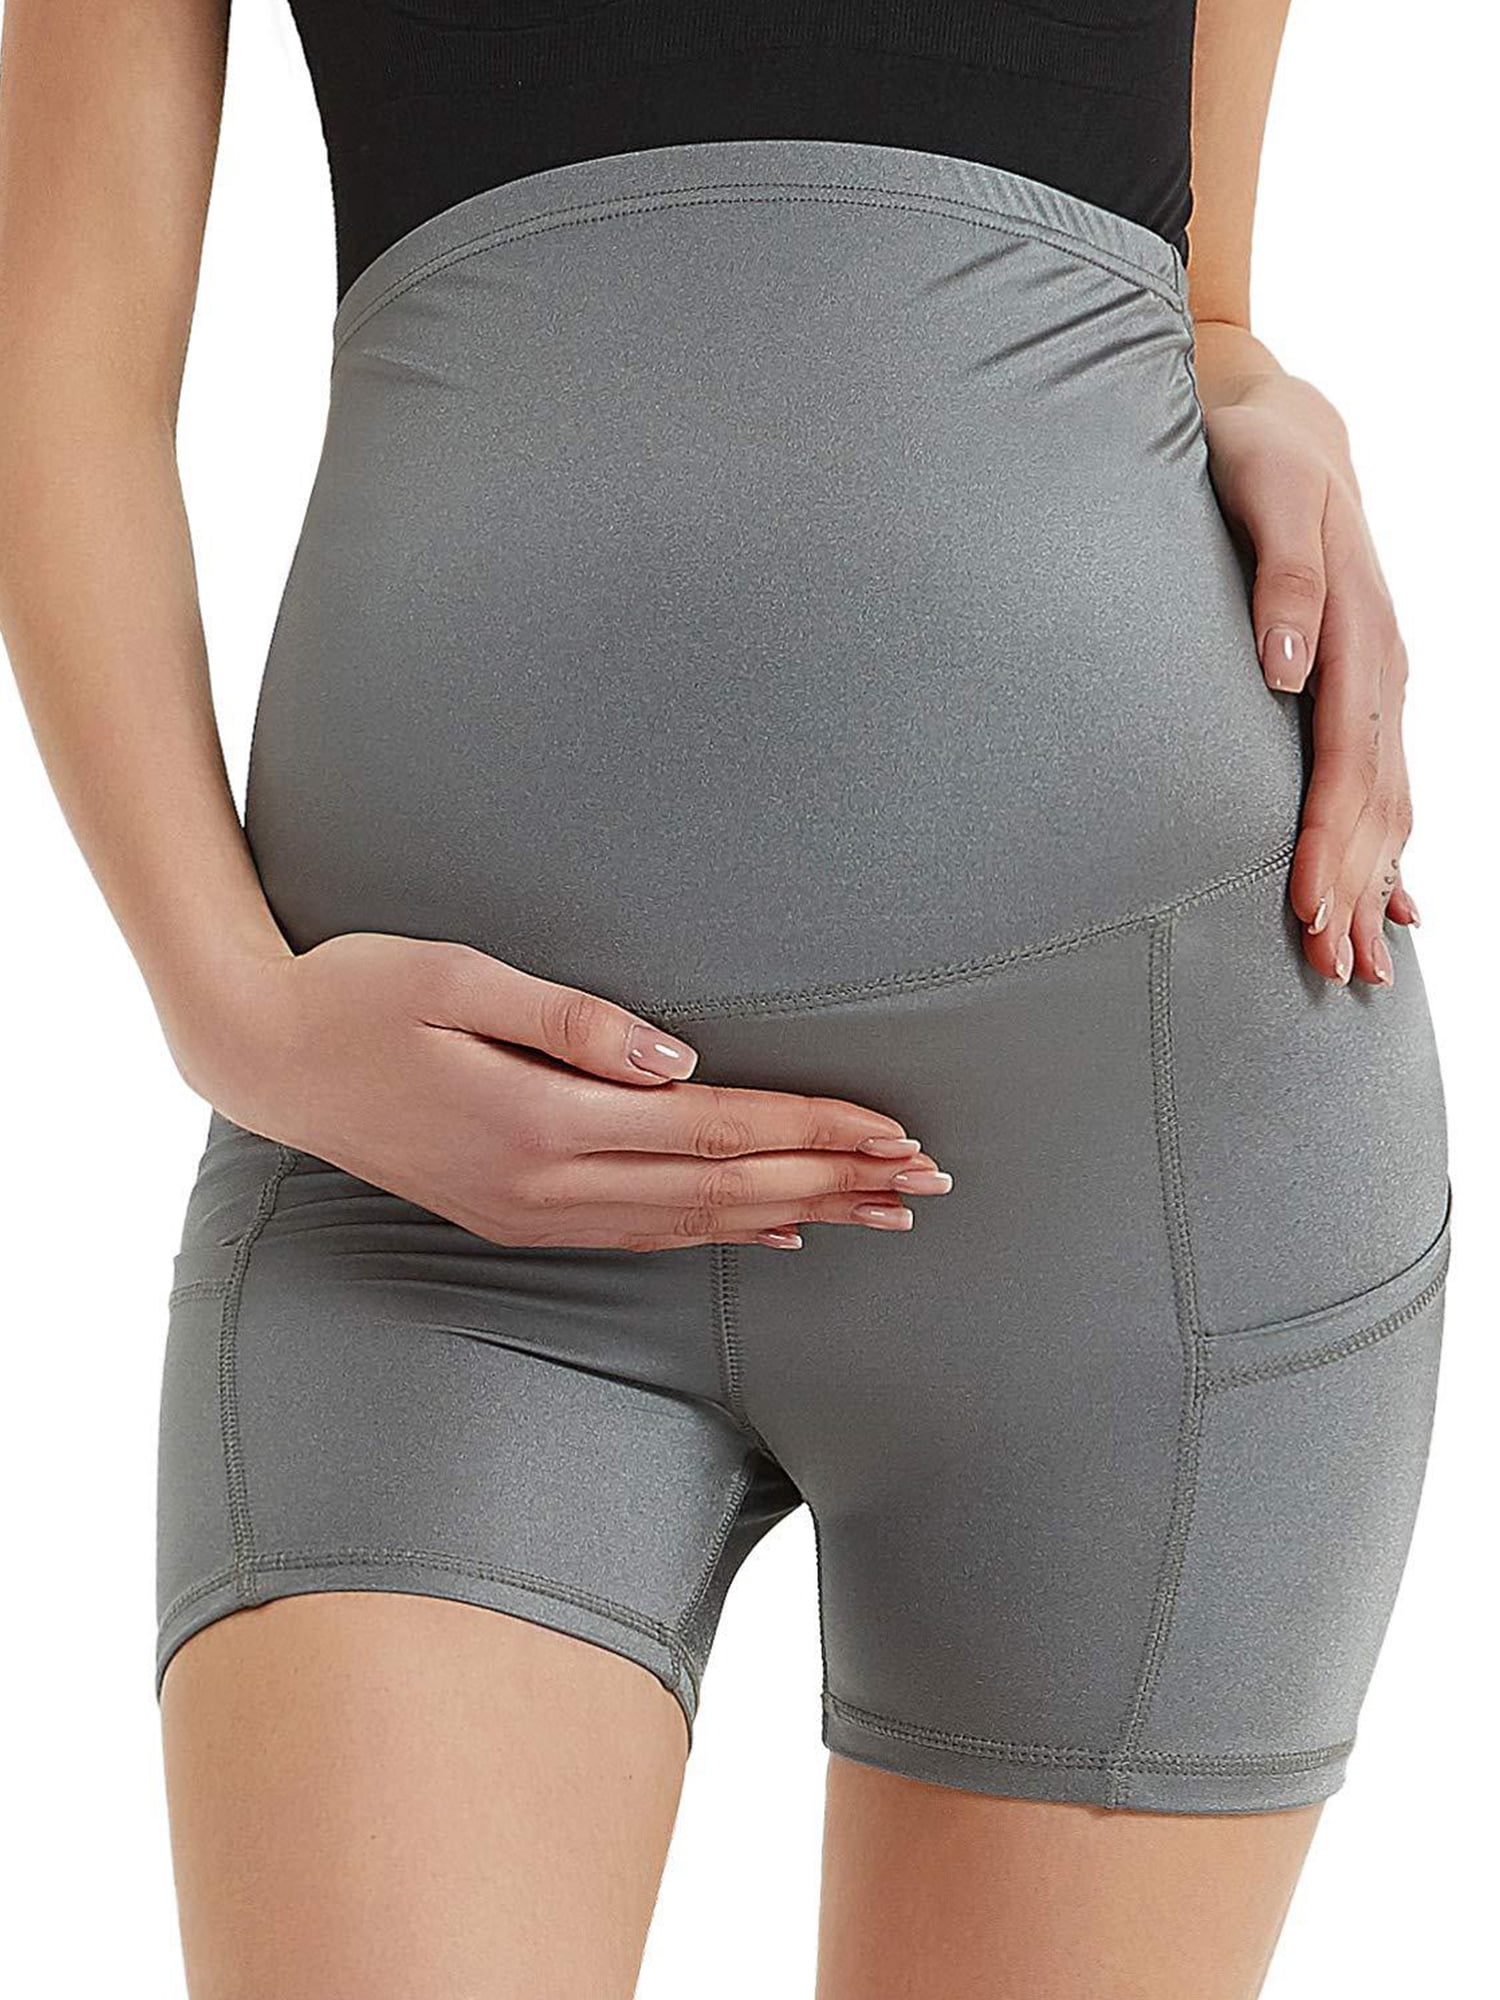 Pregnancy Shorts Adjustable Maternity Shorts Over Bump Women Plus Size Underskirt Shorts High Elastic Belly Support Cotton Leggings Knickers Soft Comfortable High Waist Safety Shorts with Pockets